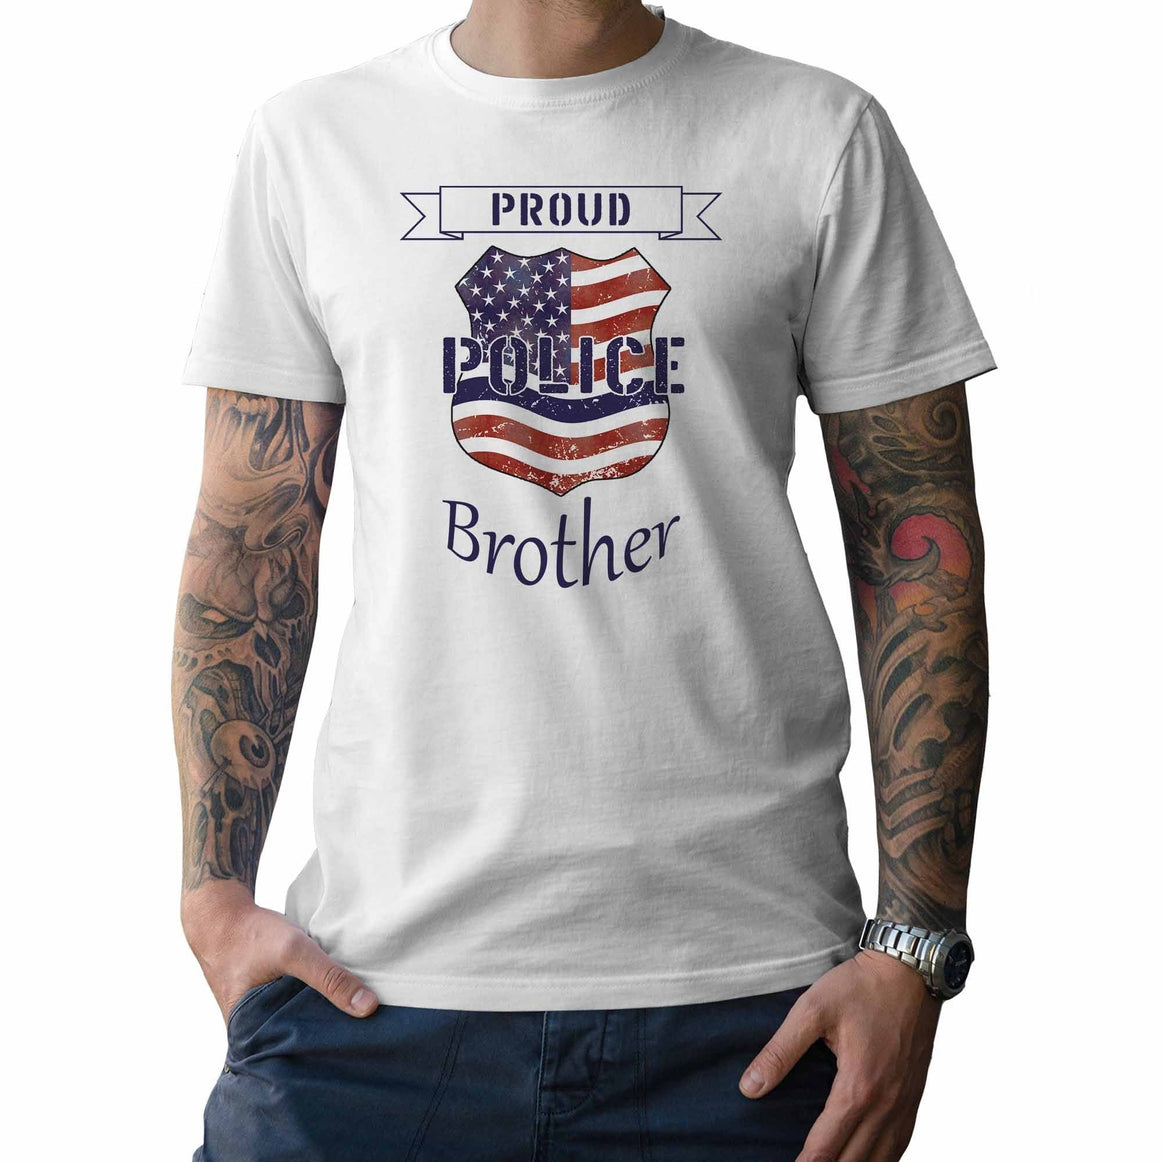 Proud Police Brother - My Custom Tee Party